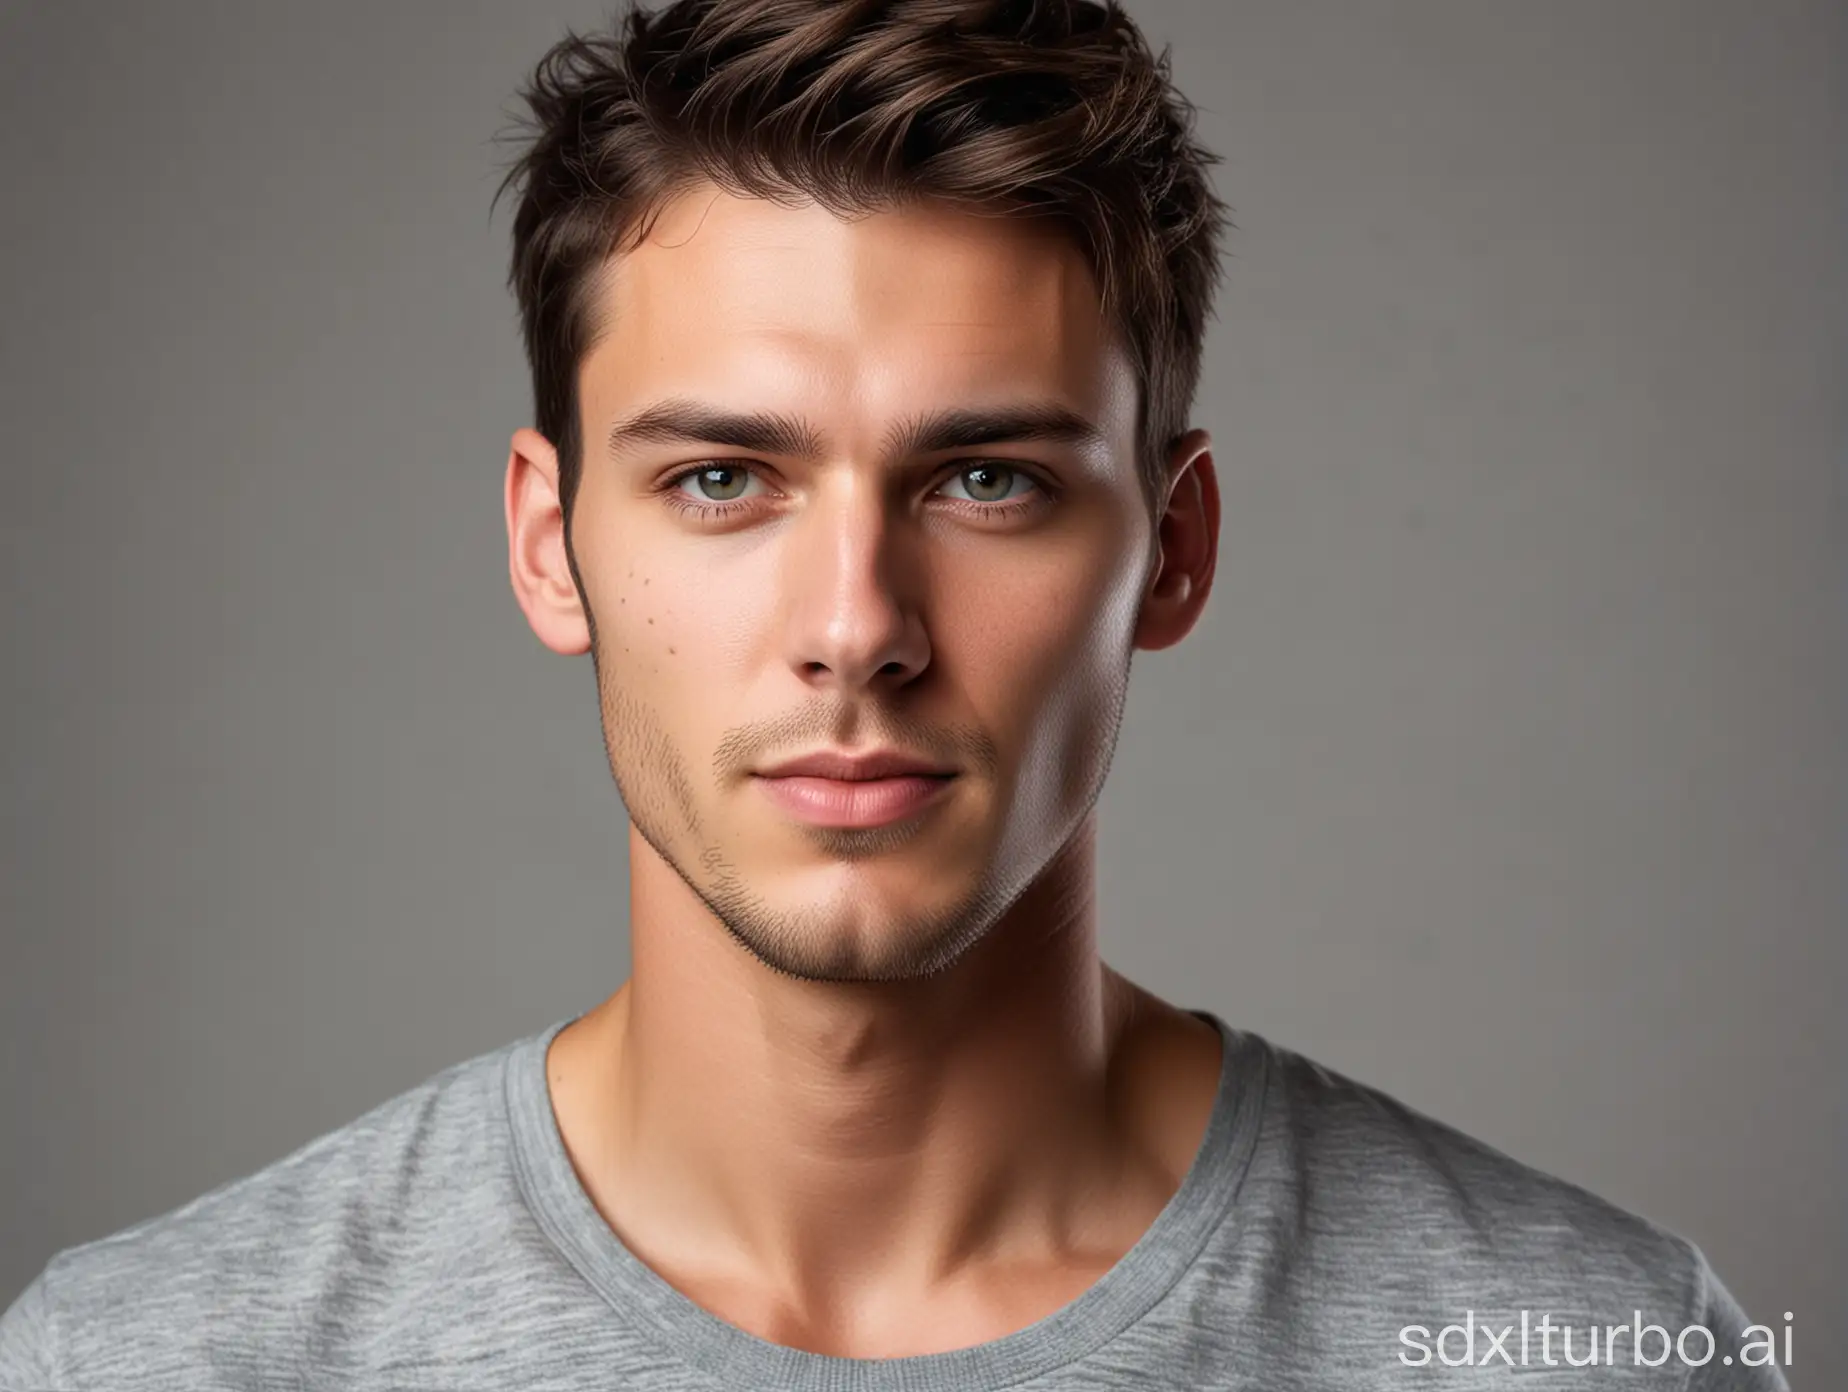 Headshot of an interesting male model looking directly at the camera in flat lighting with no shadows